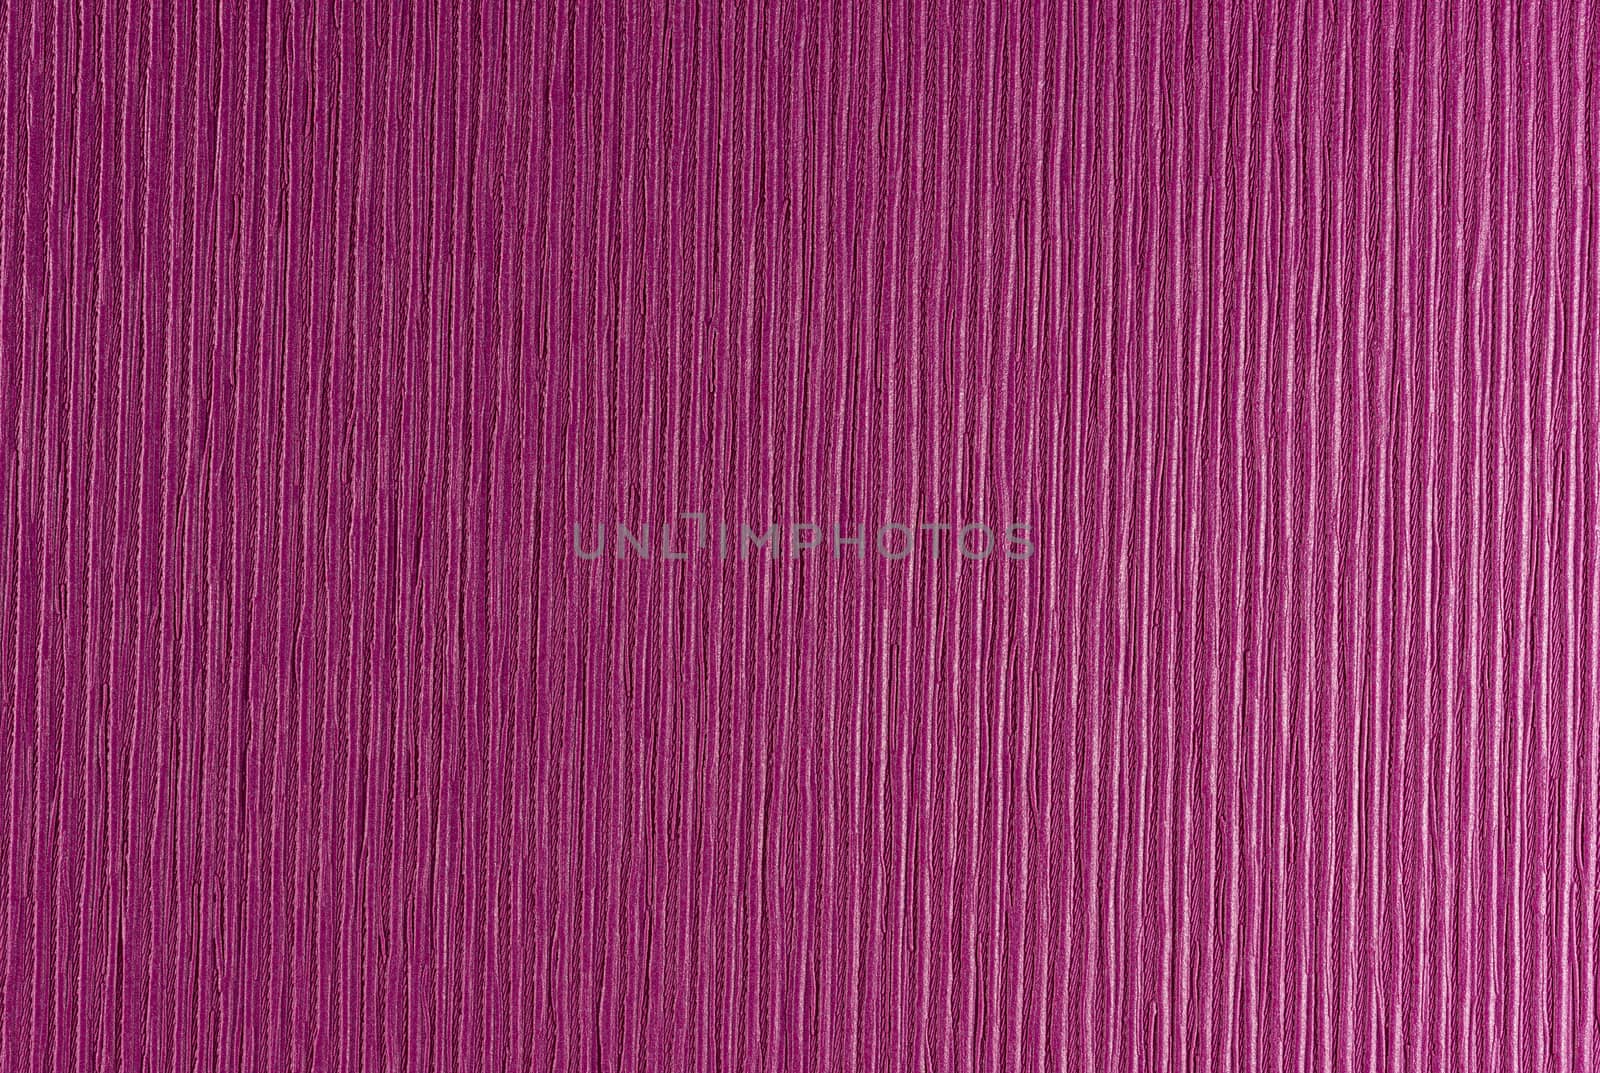 texture on paper background in purple